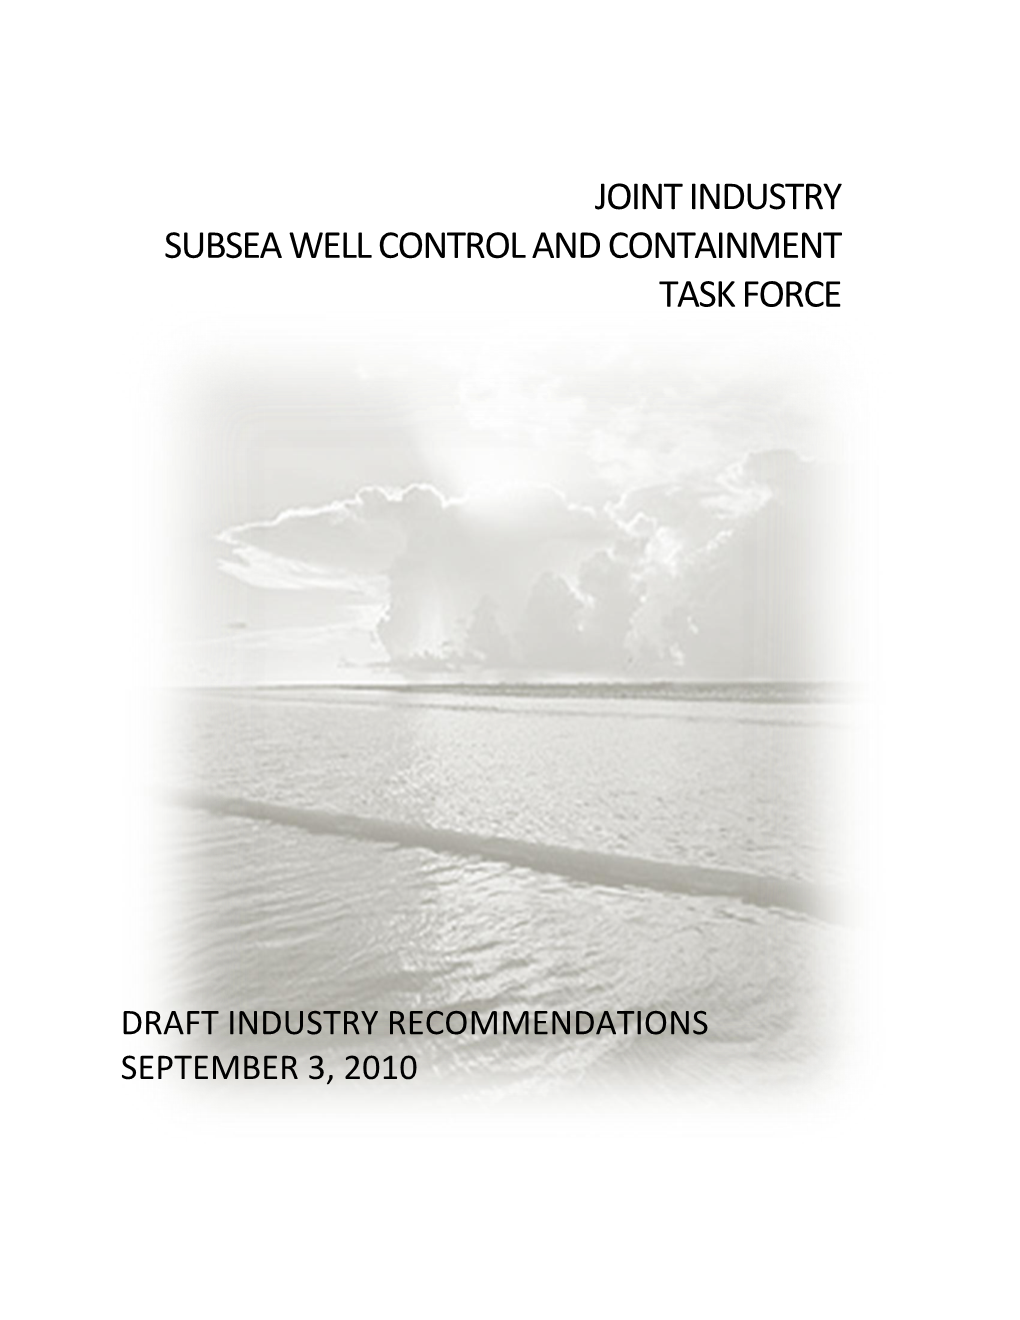 Joint Industry Subsea Well Control and Containment Task Force